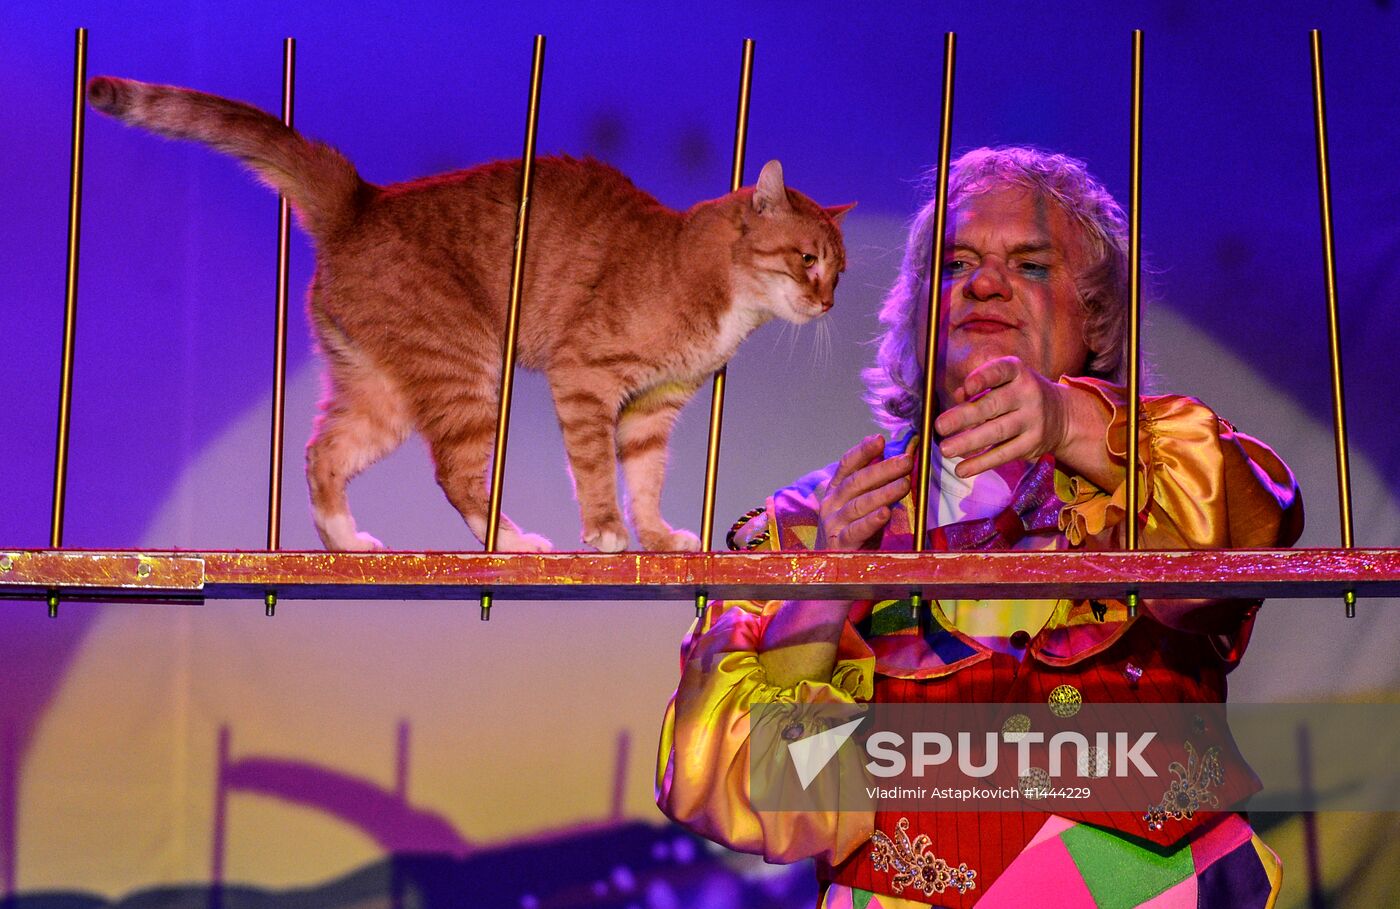 Moscow's Cat Theater reopens after renovation